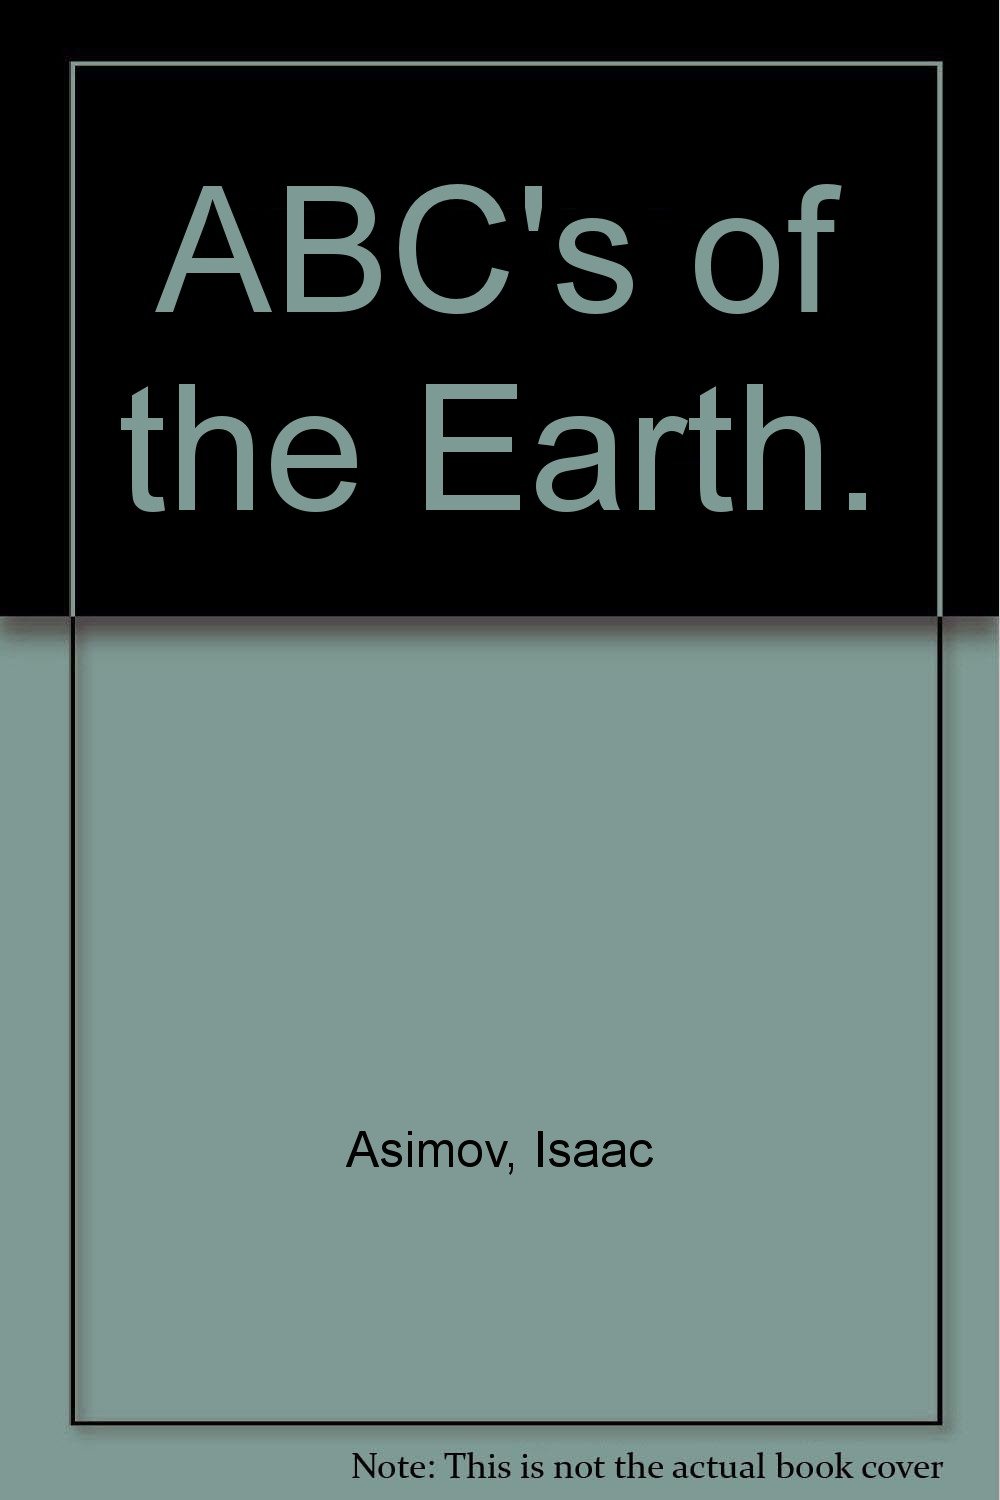 ABC's of the earth written by Isaac Asimov